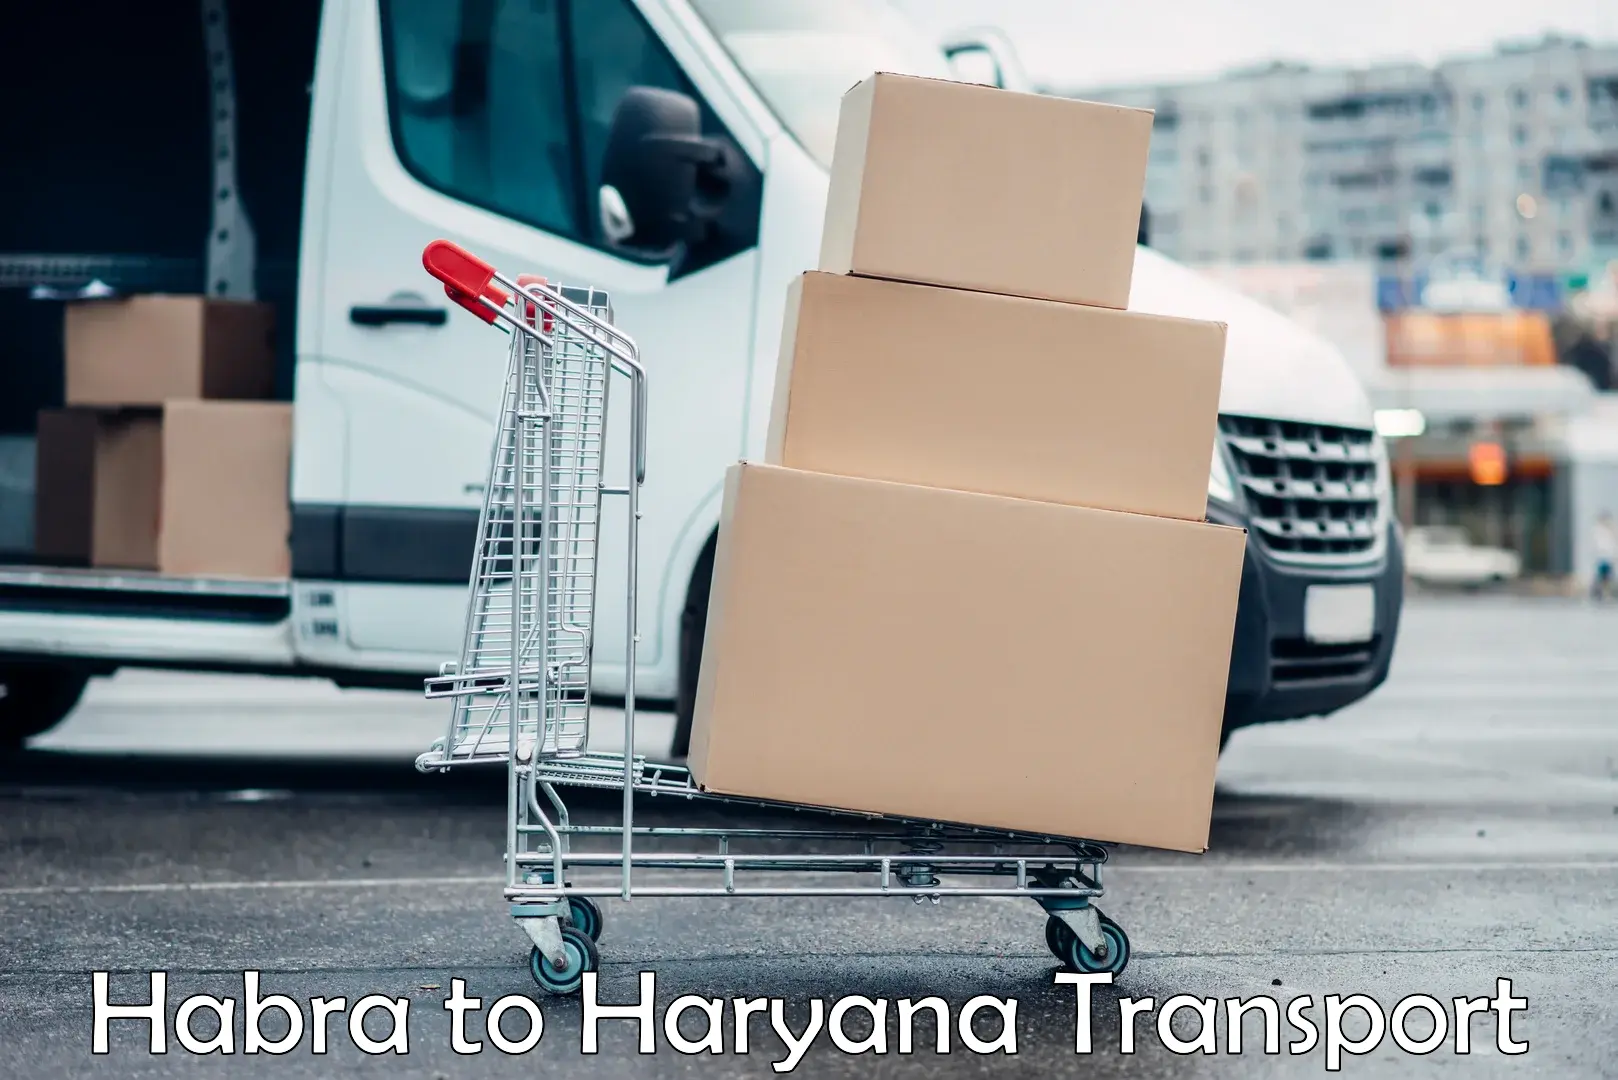 Container transport service Habra to NCR Haryana